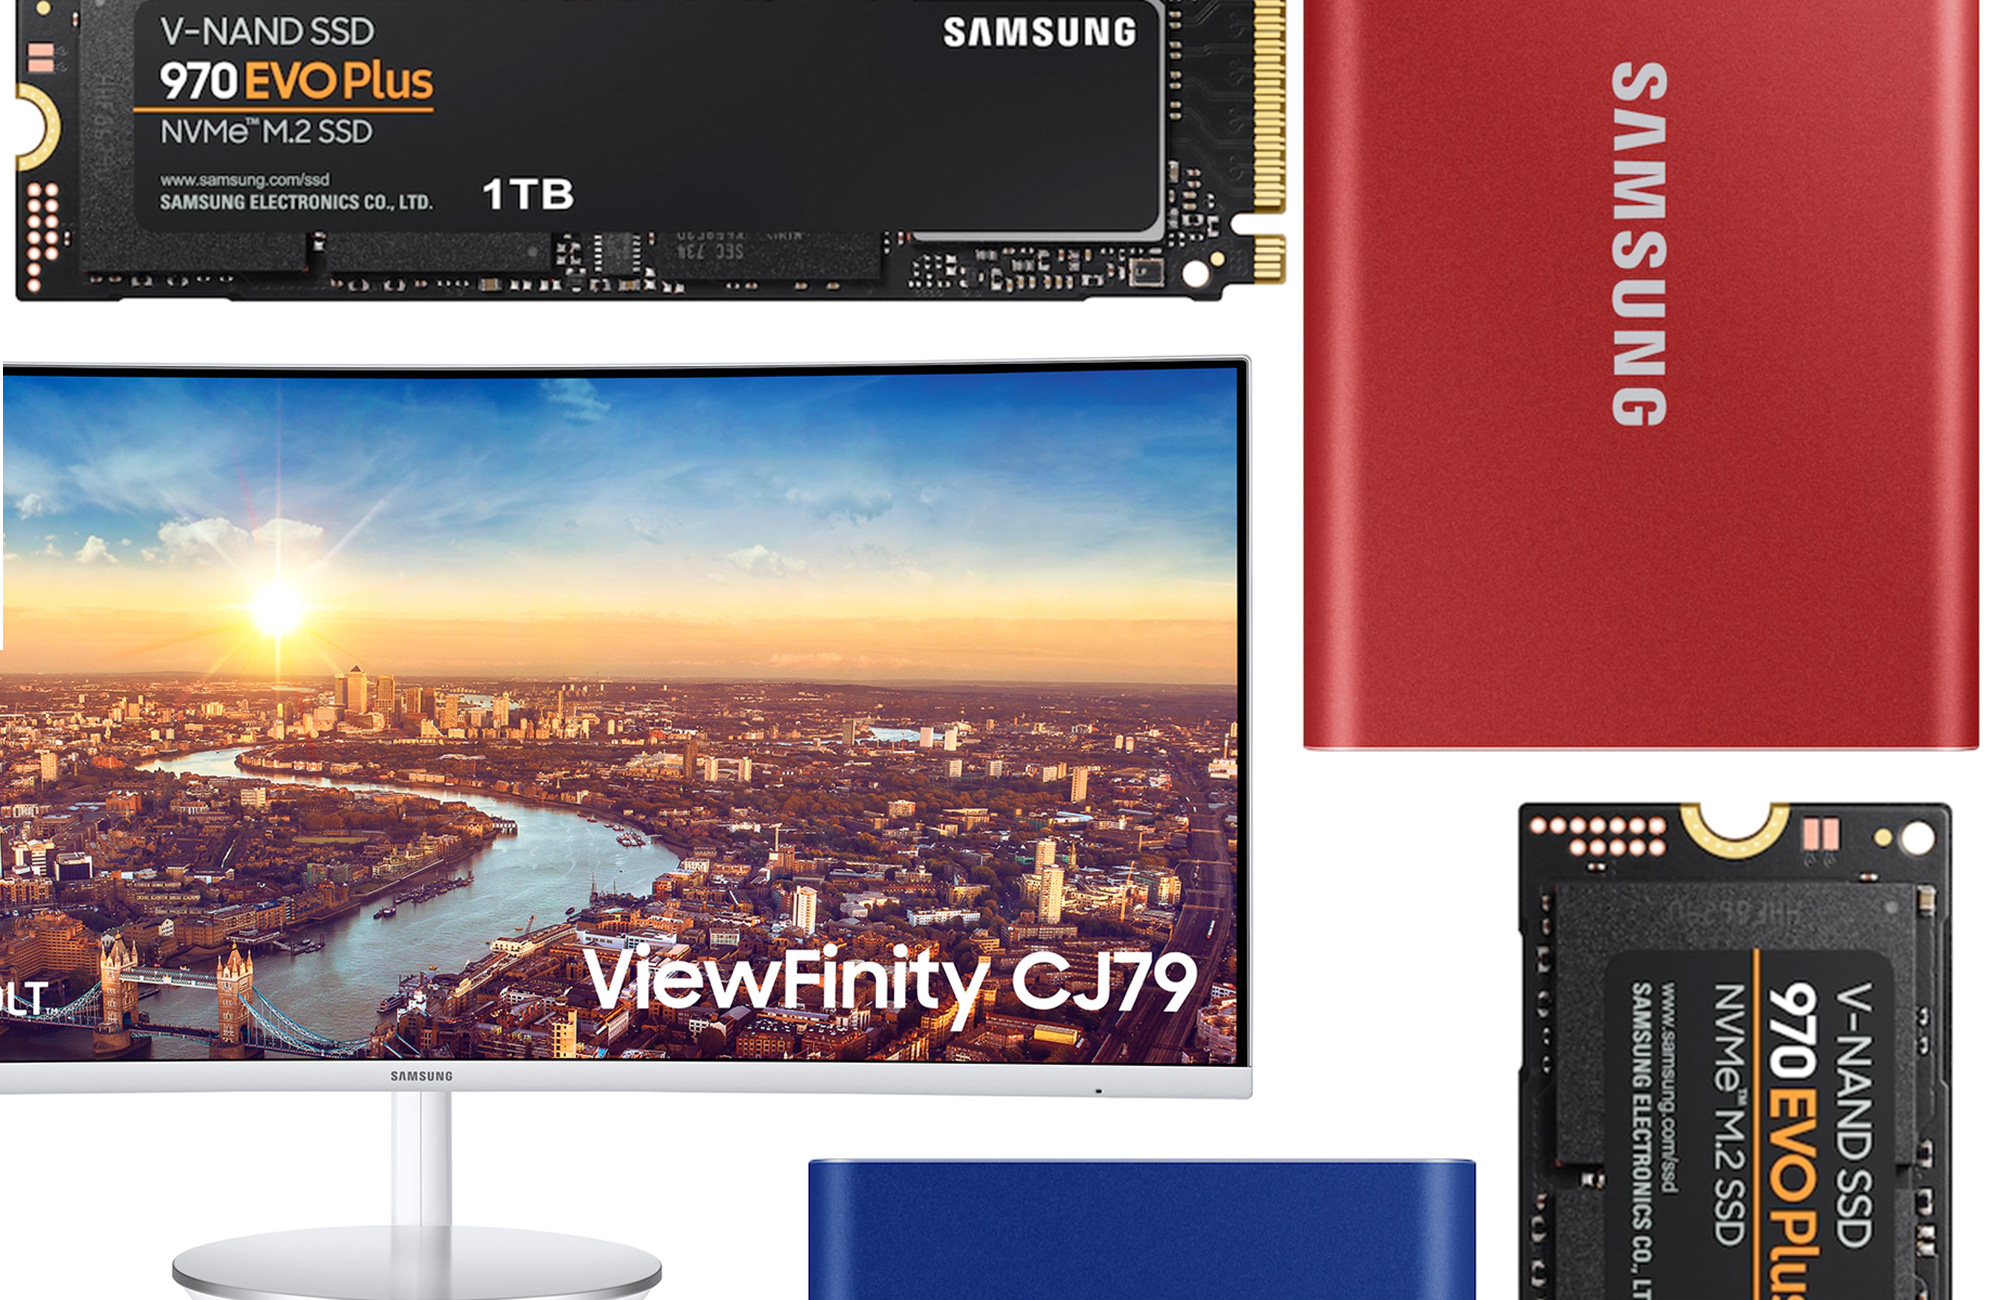 Samsung’s back-to-school sale drops prices on monitors and SSD storage